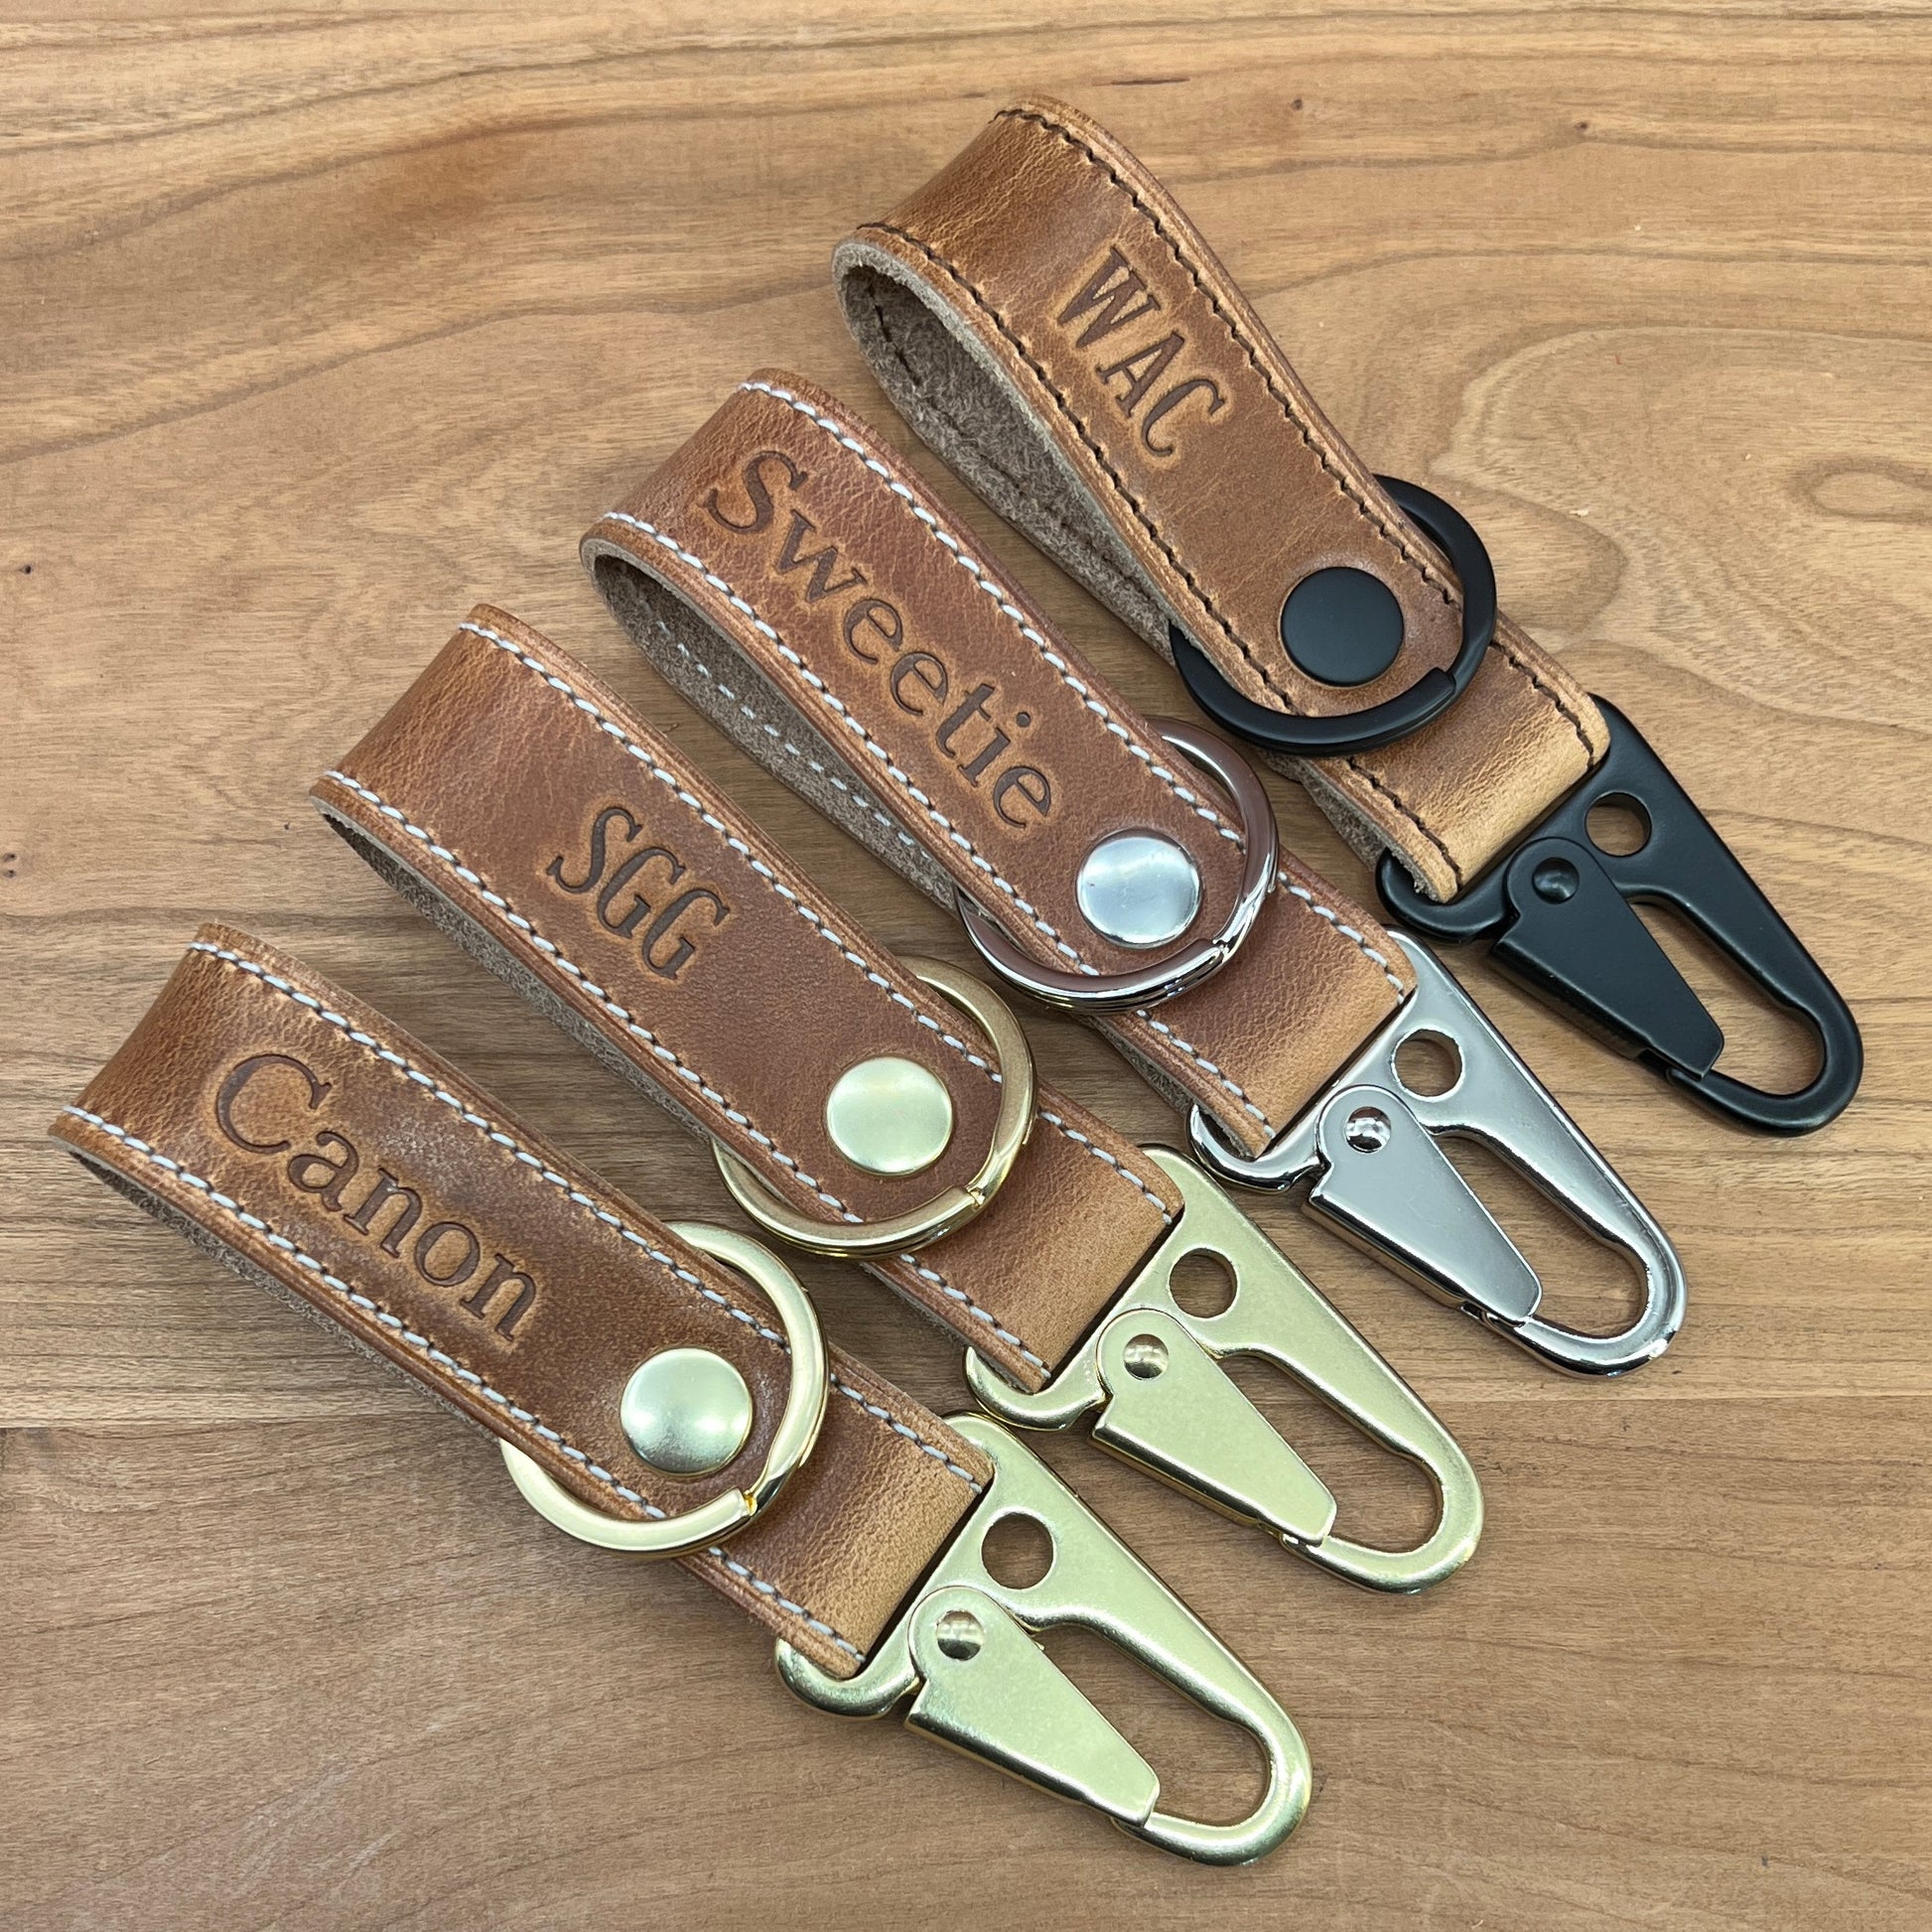 Horween Leather Houston, Leather | – Belt Custom Handmade to Keychain Loop Pen TX in and Order